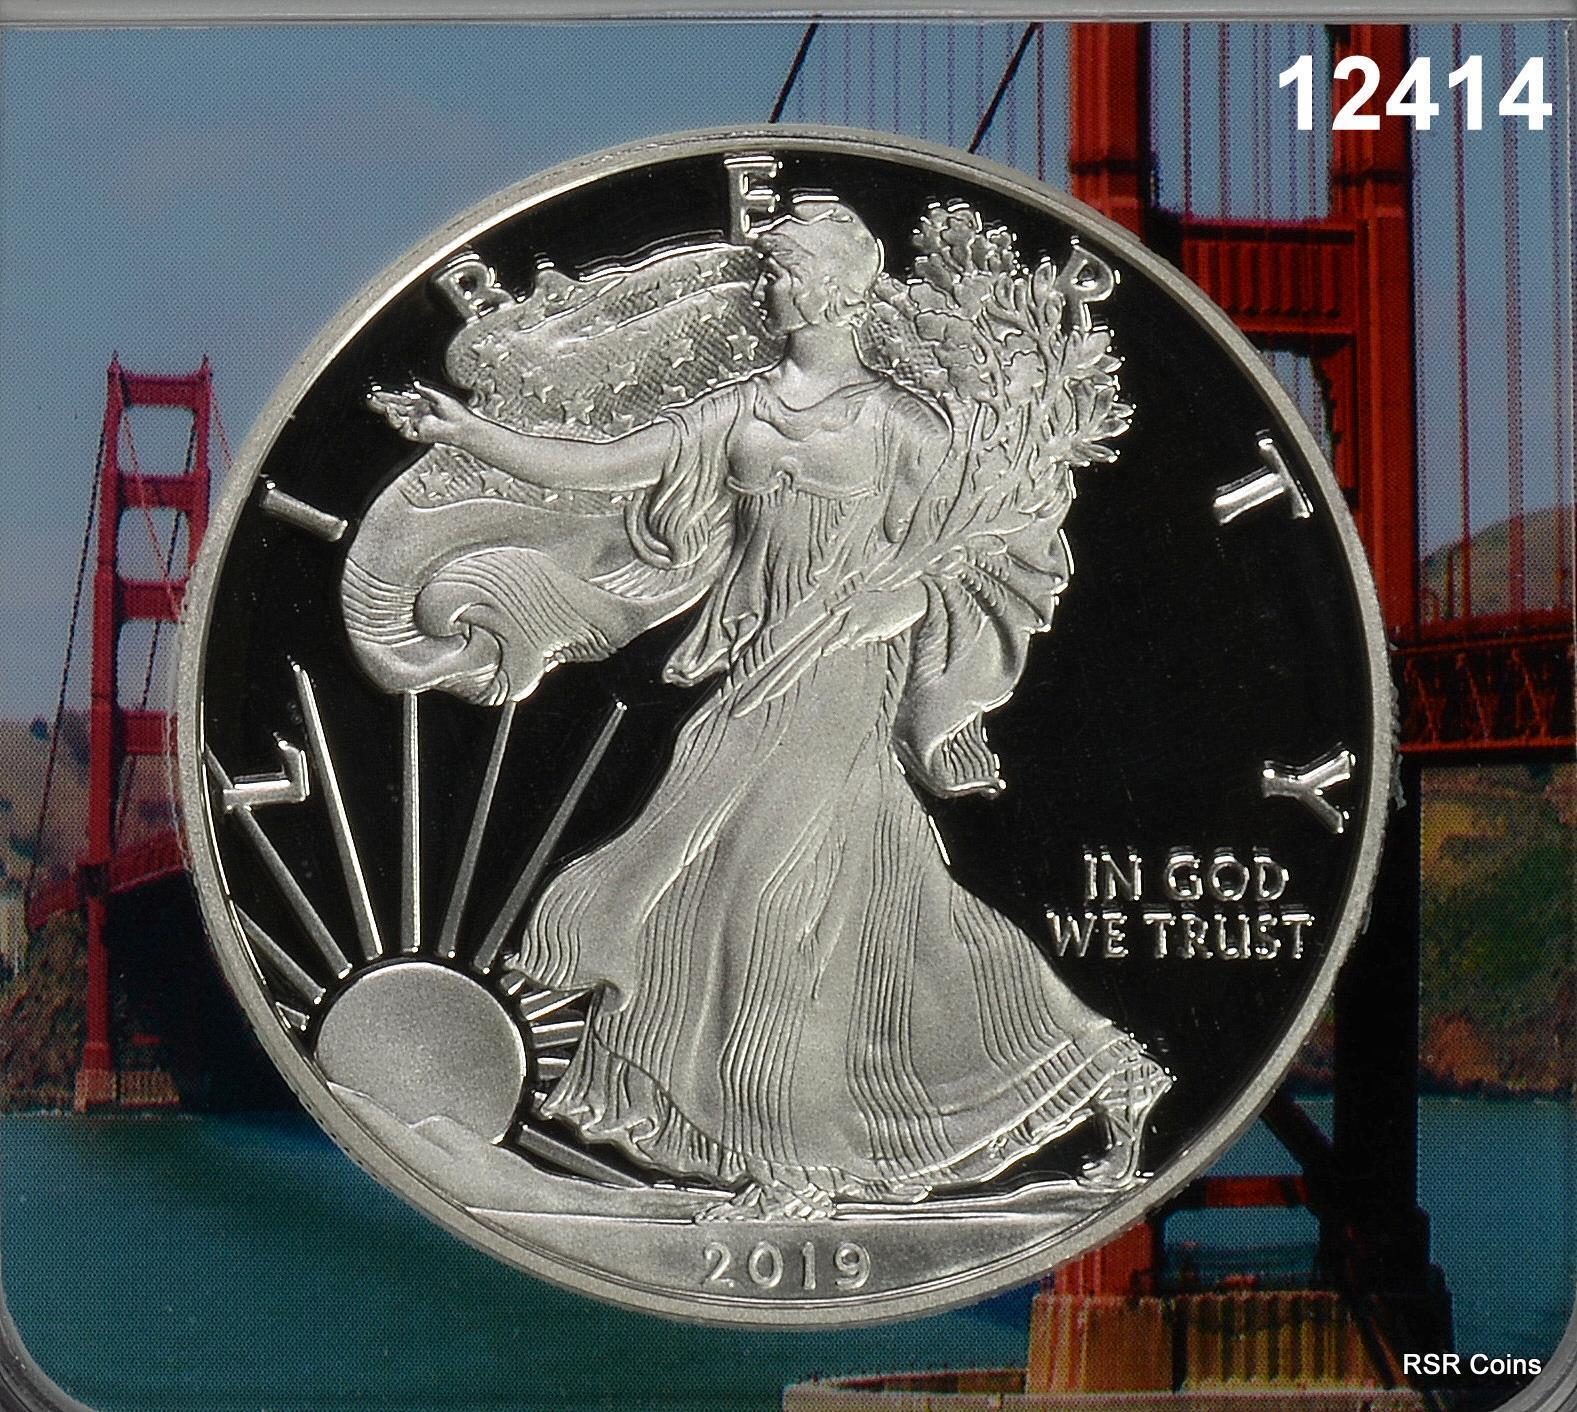 2019 S SILVER EAGLE NGC CERTIFIED ER PF70 ULTRA CAMEO GOLDEN GATE! PERFECT#12414